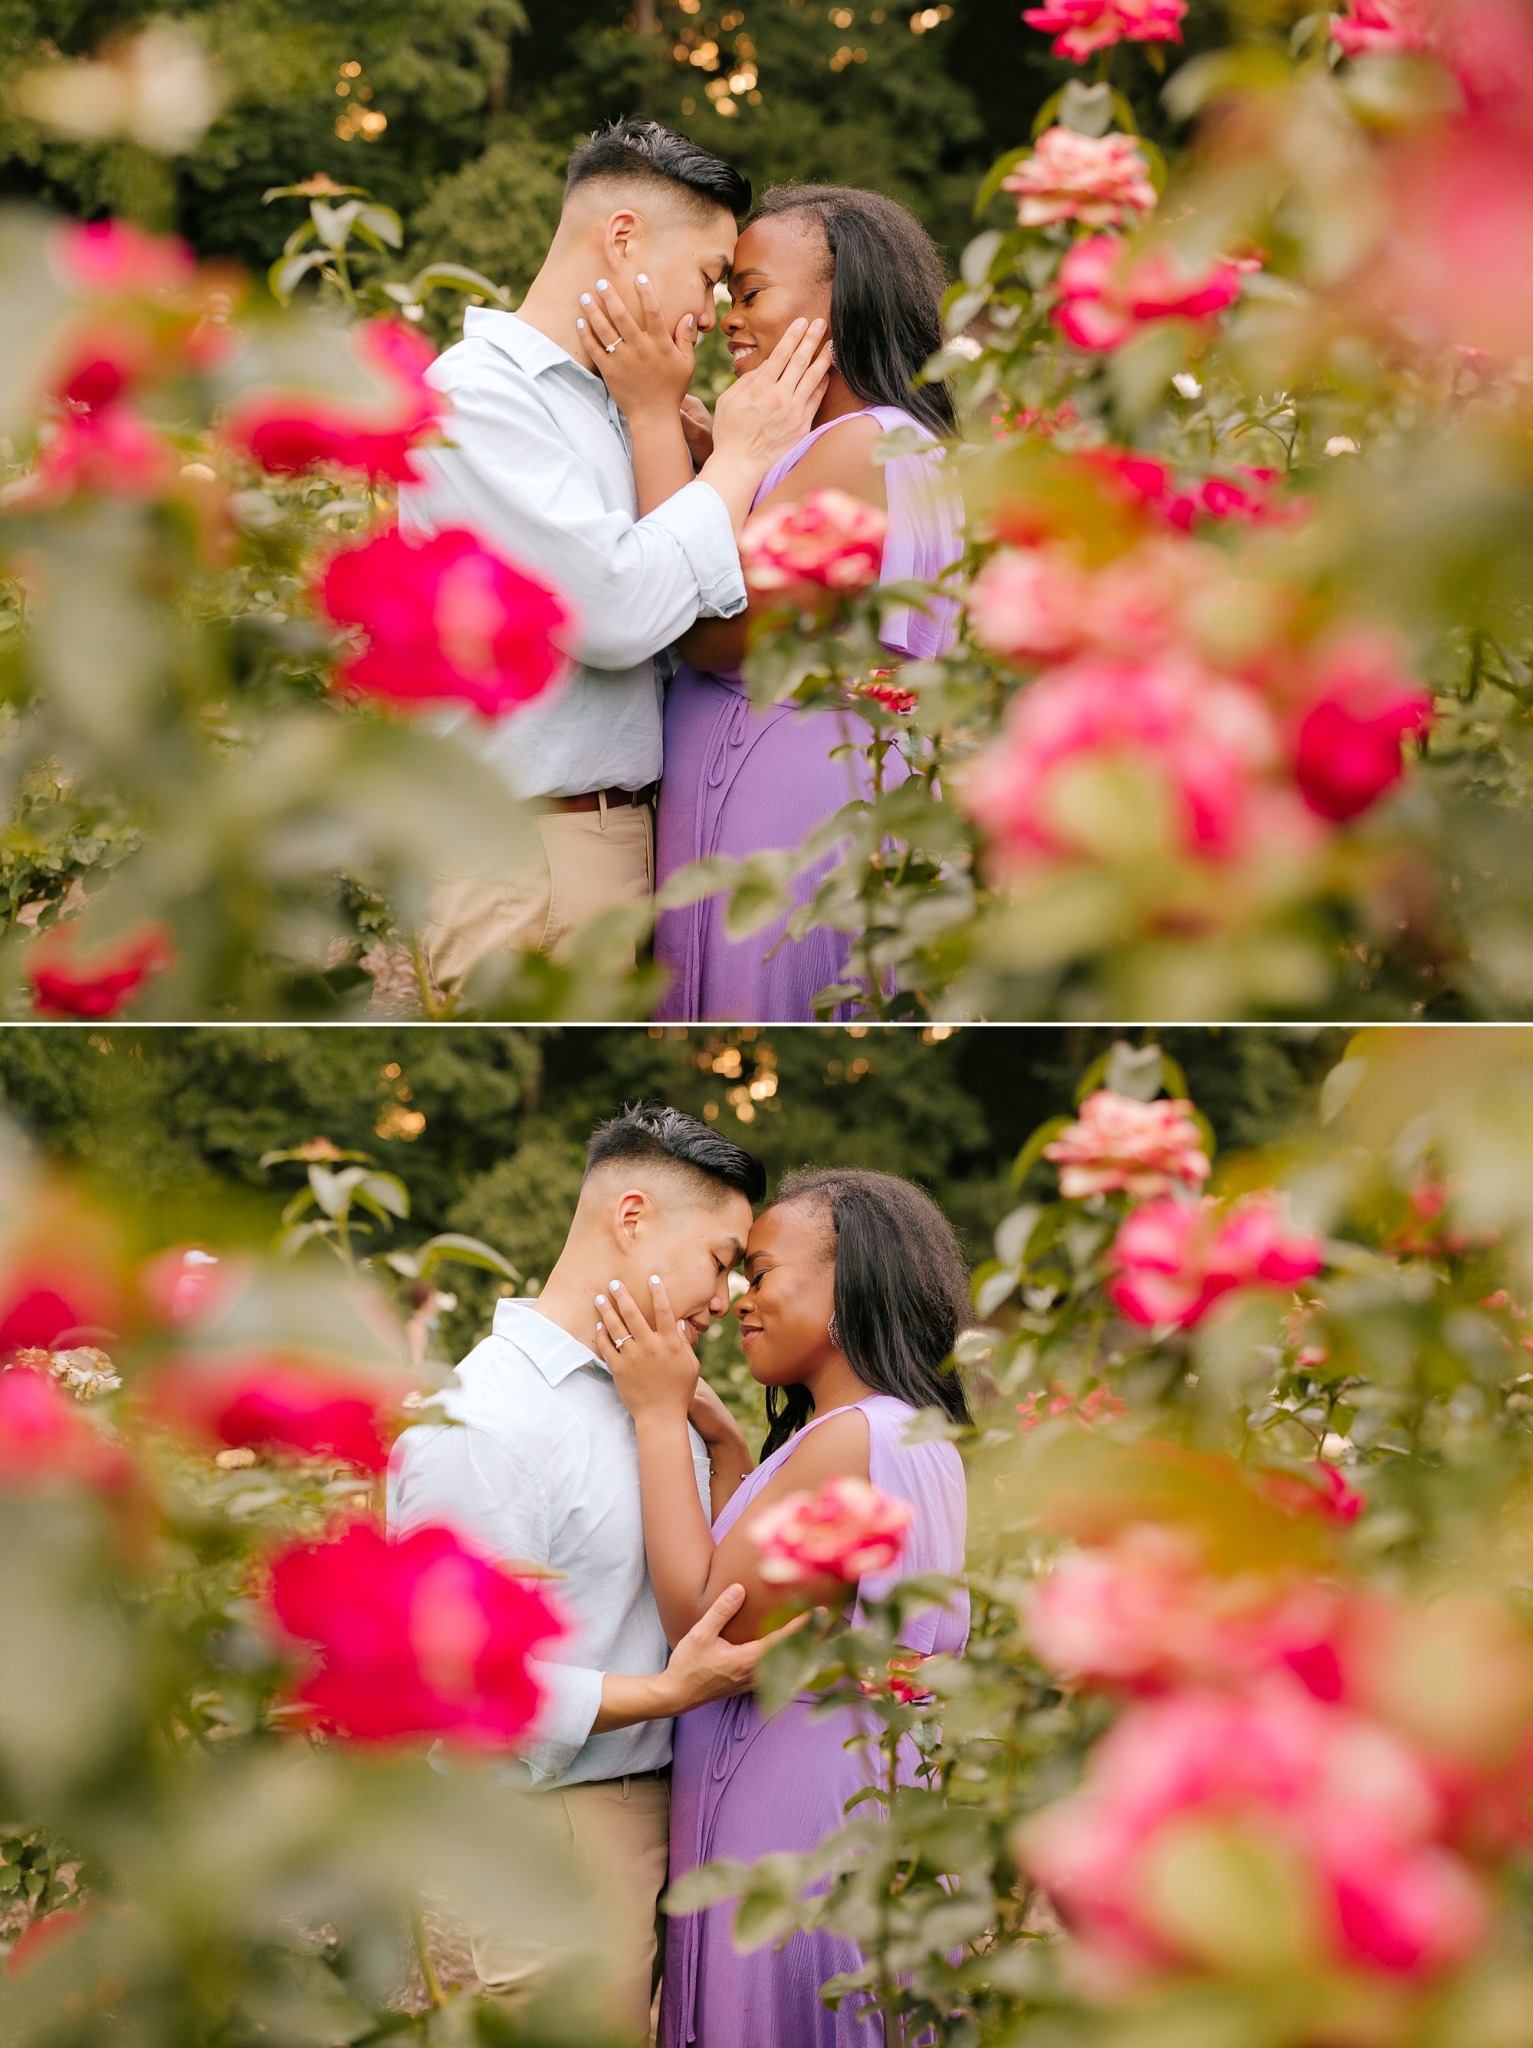 romantic summer engagement portraits at WRAL Gardens